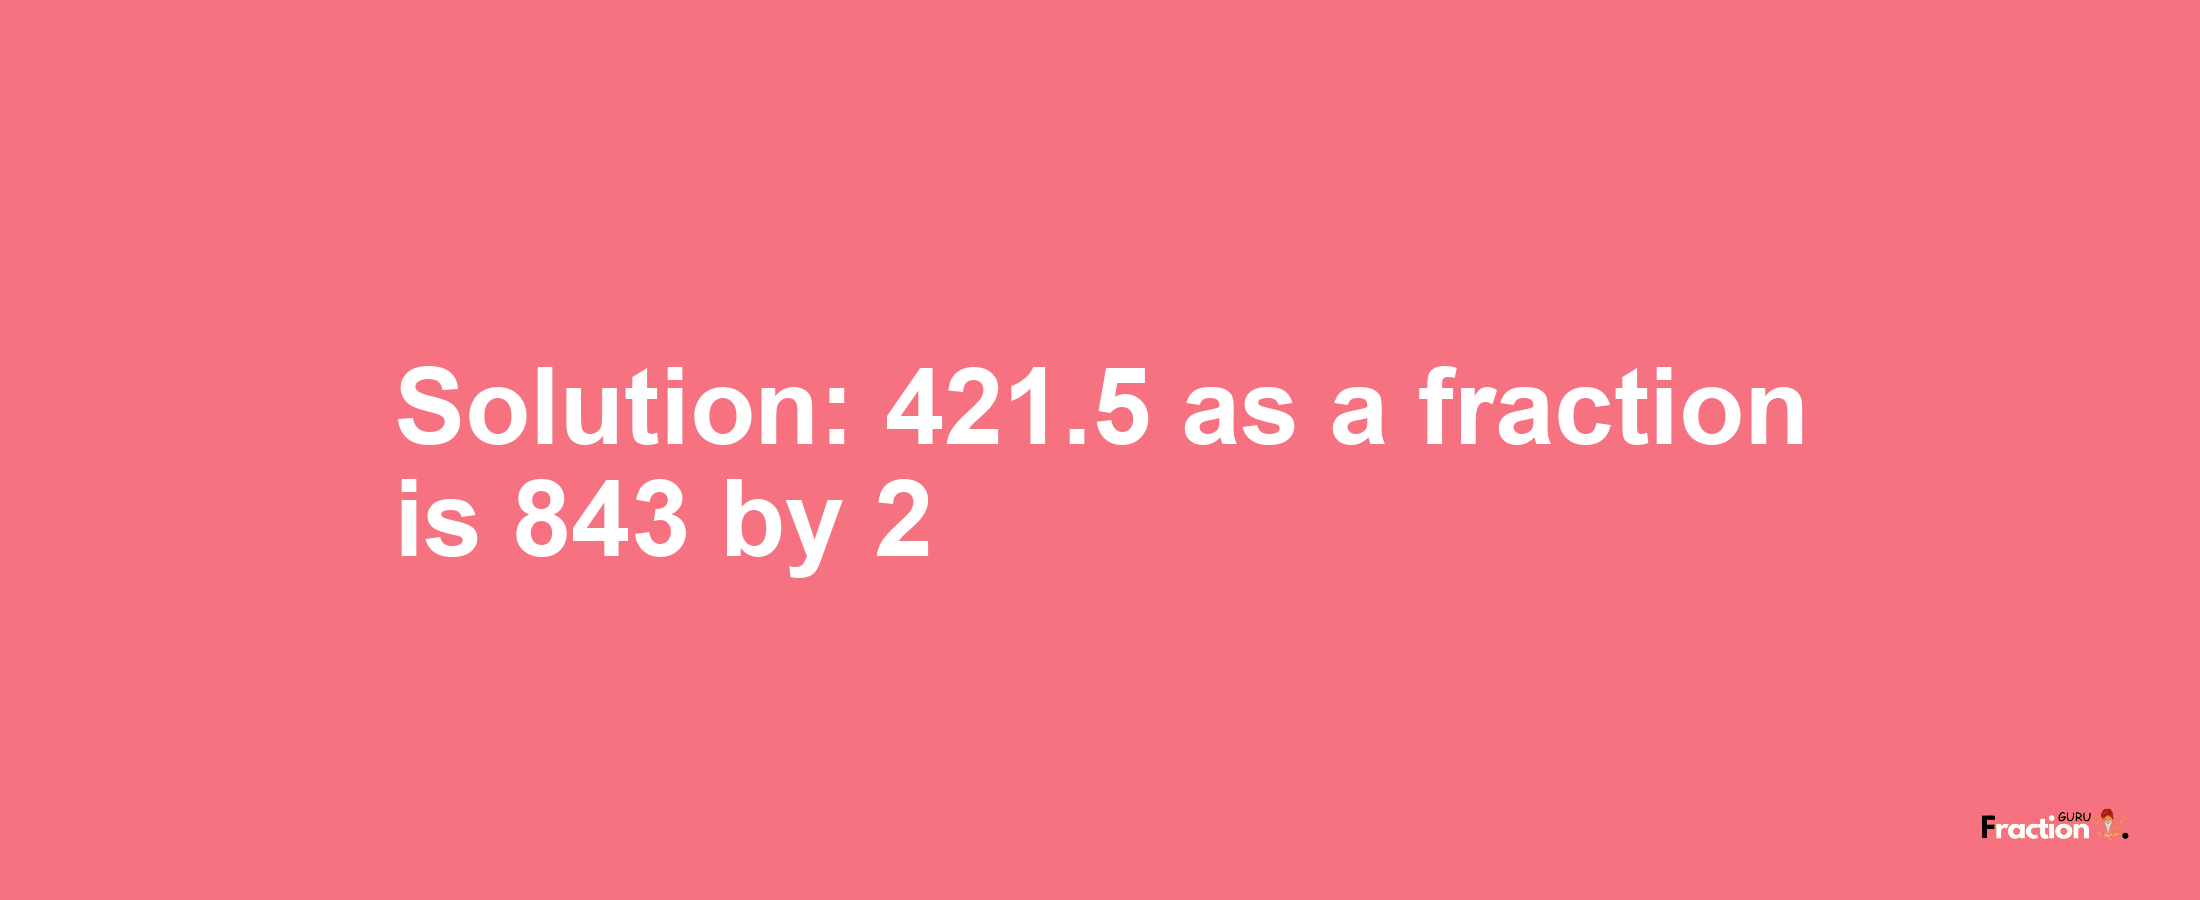 Solution:421.5 as a fraction is 843/2